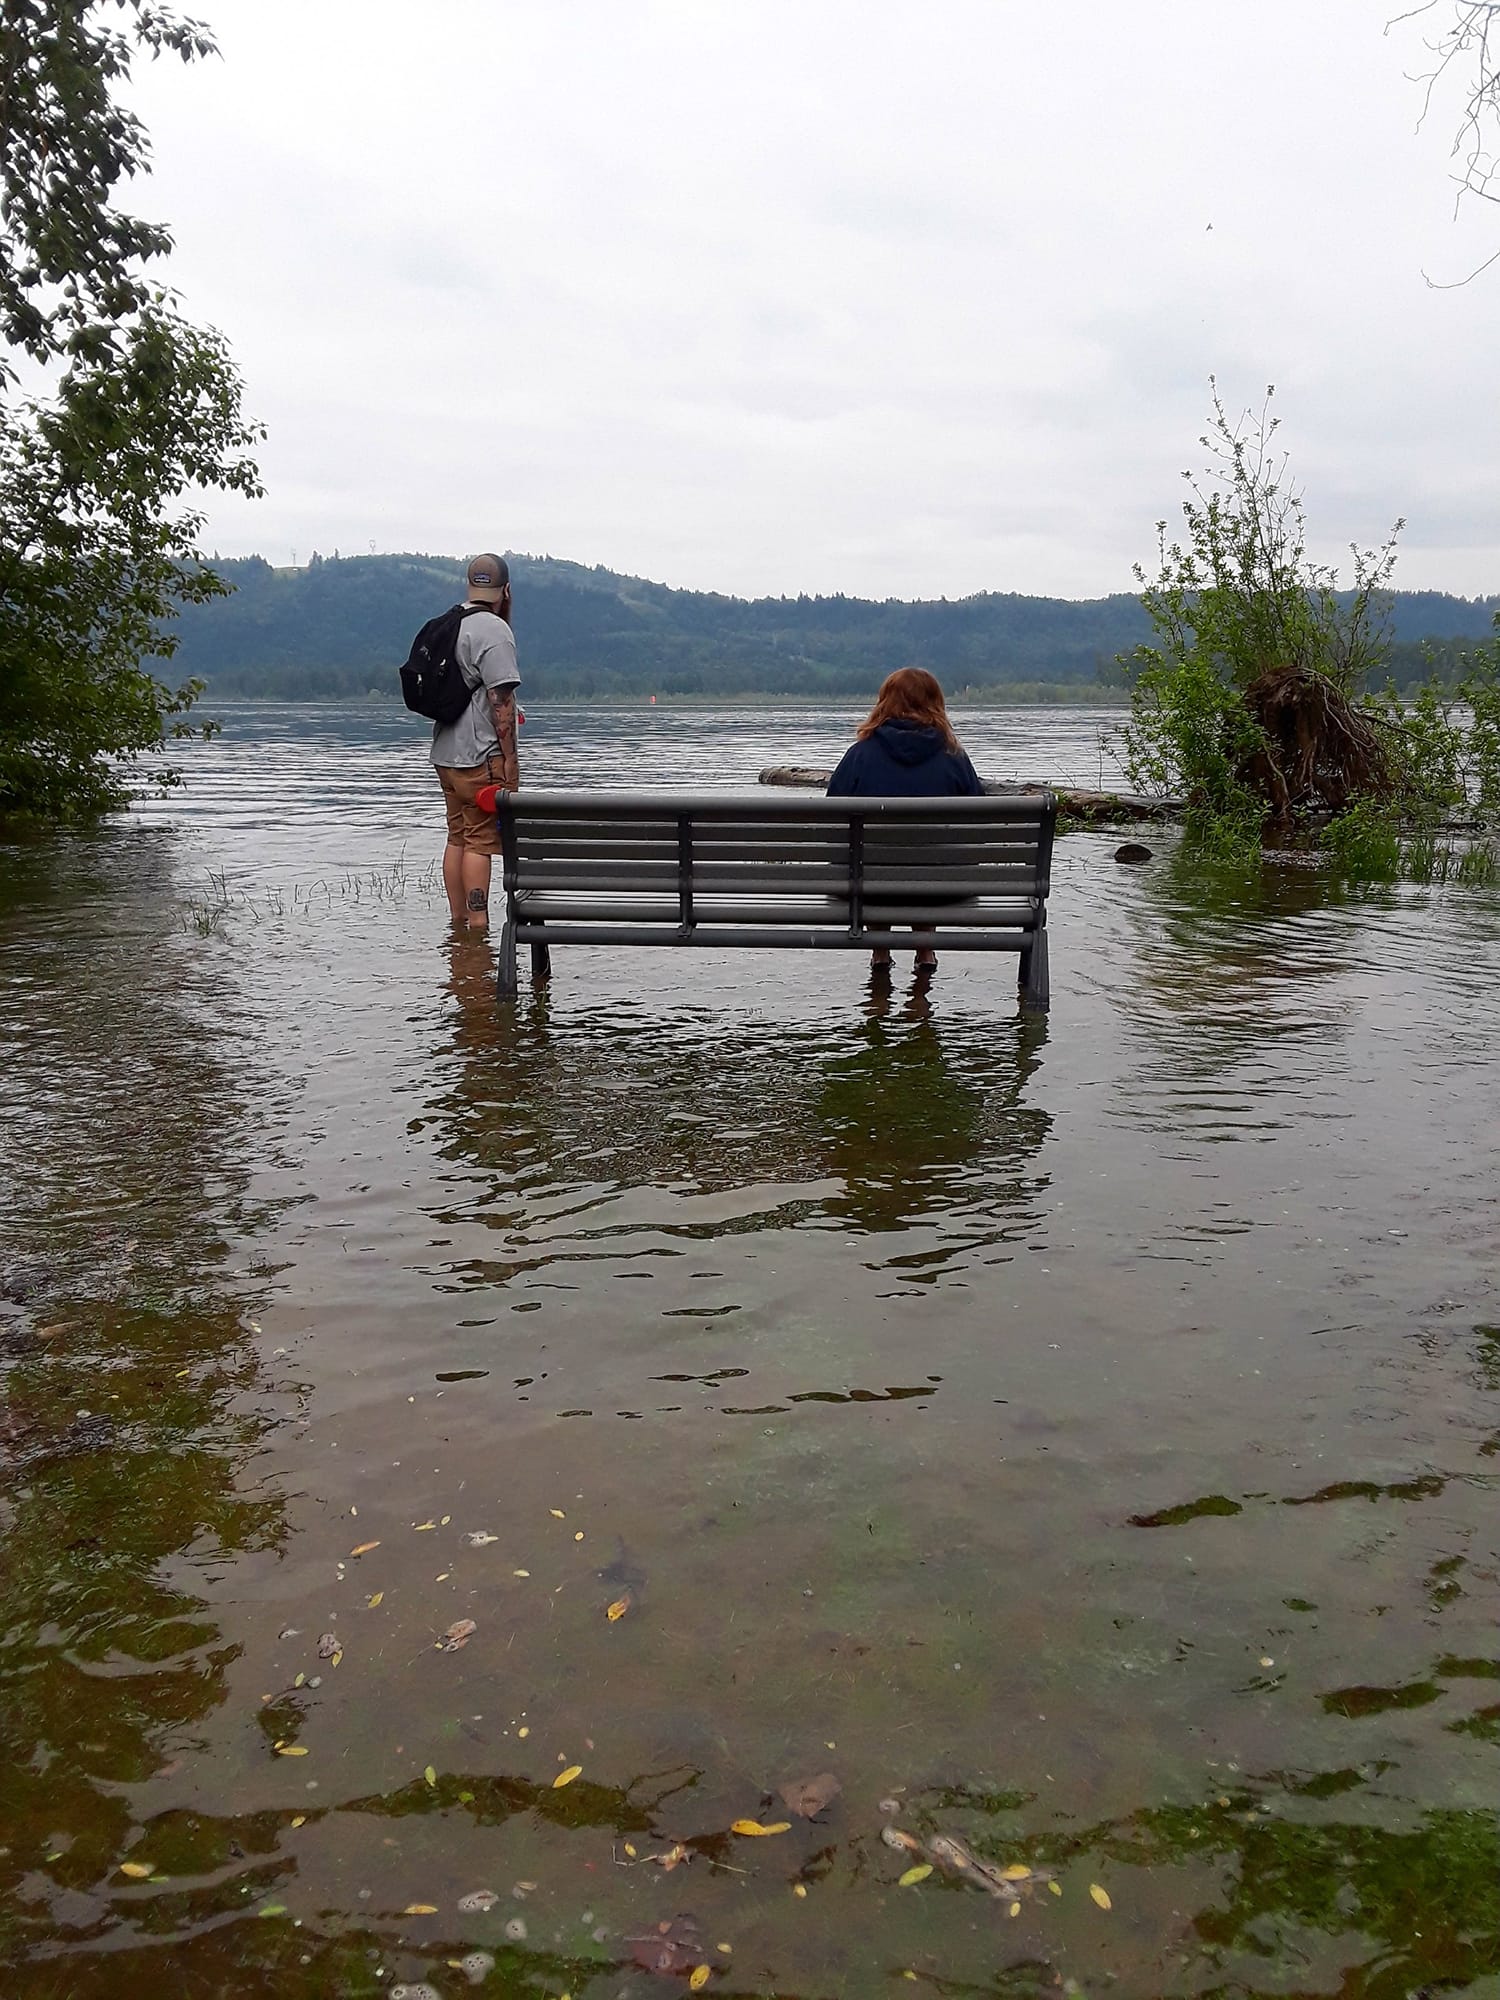 A view of high river levels at Captain William Clark Regional Park at Cottonwood Beach in Washougal. Kevin Paff's photo included his son, Austin Paff, and wife, Shanna Paff.